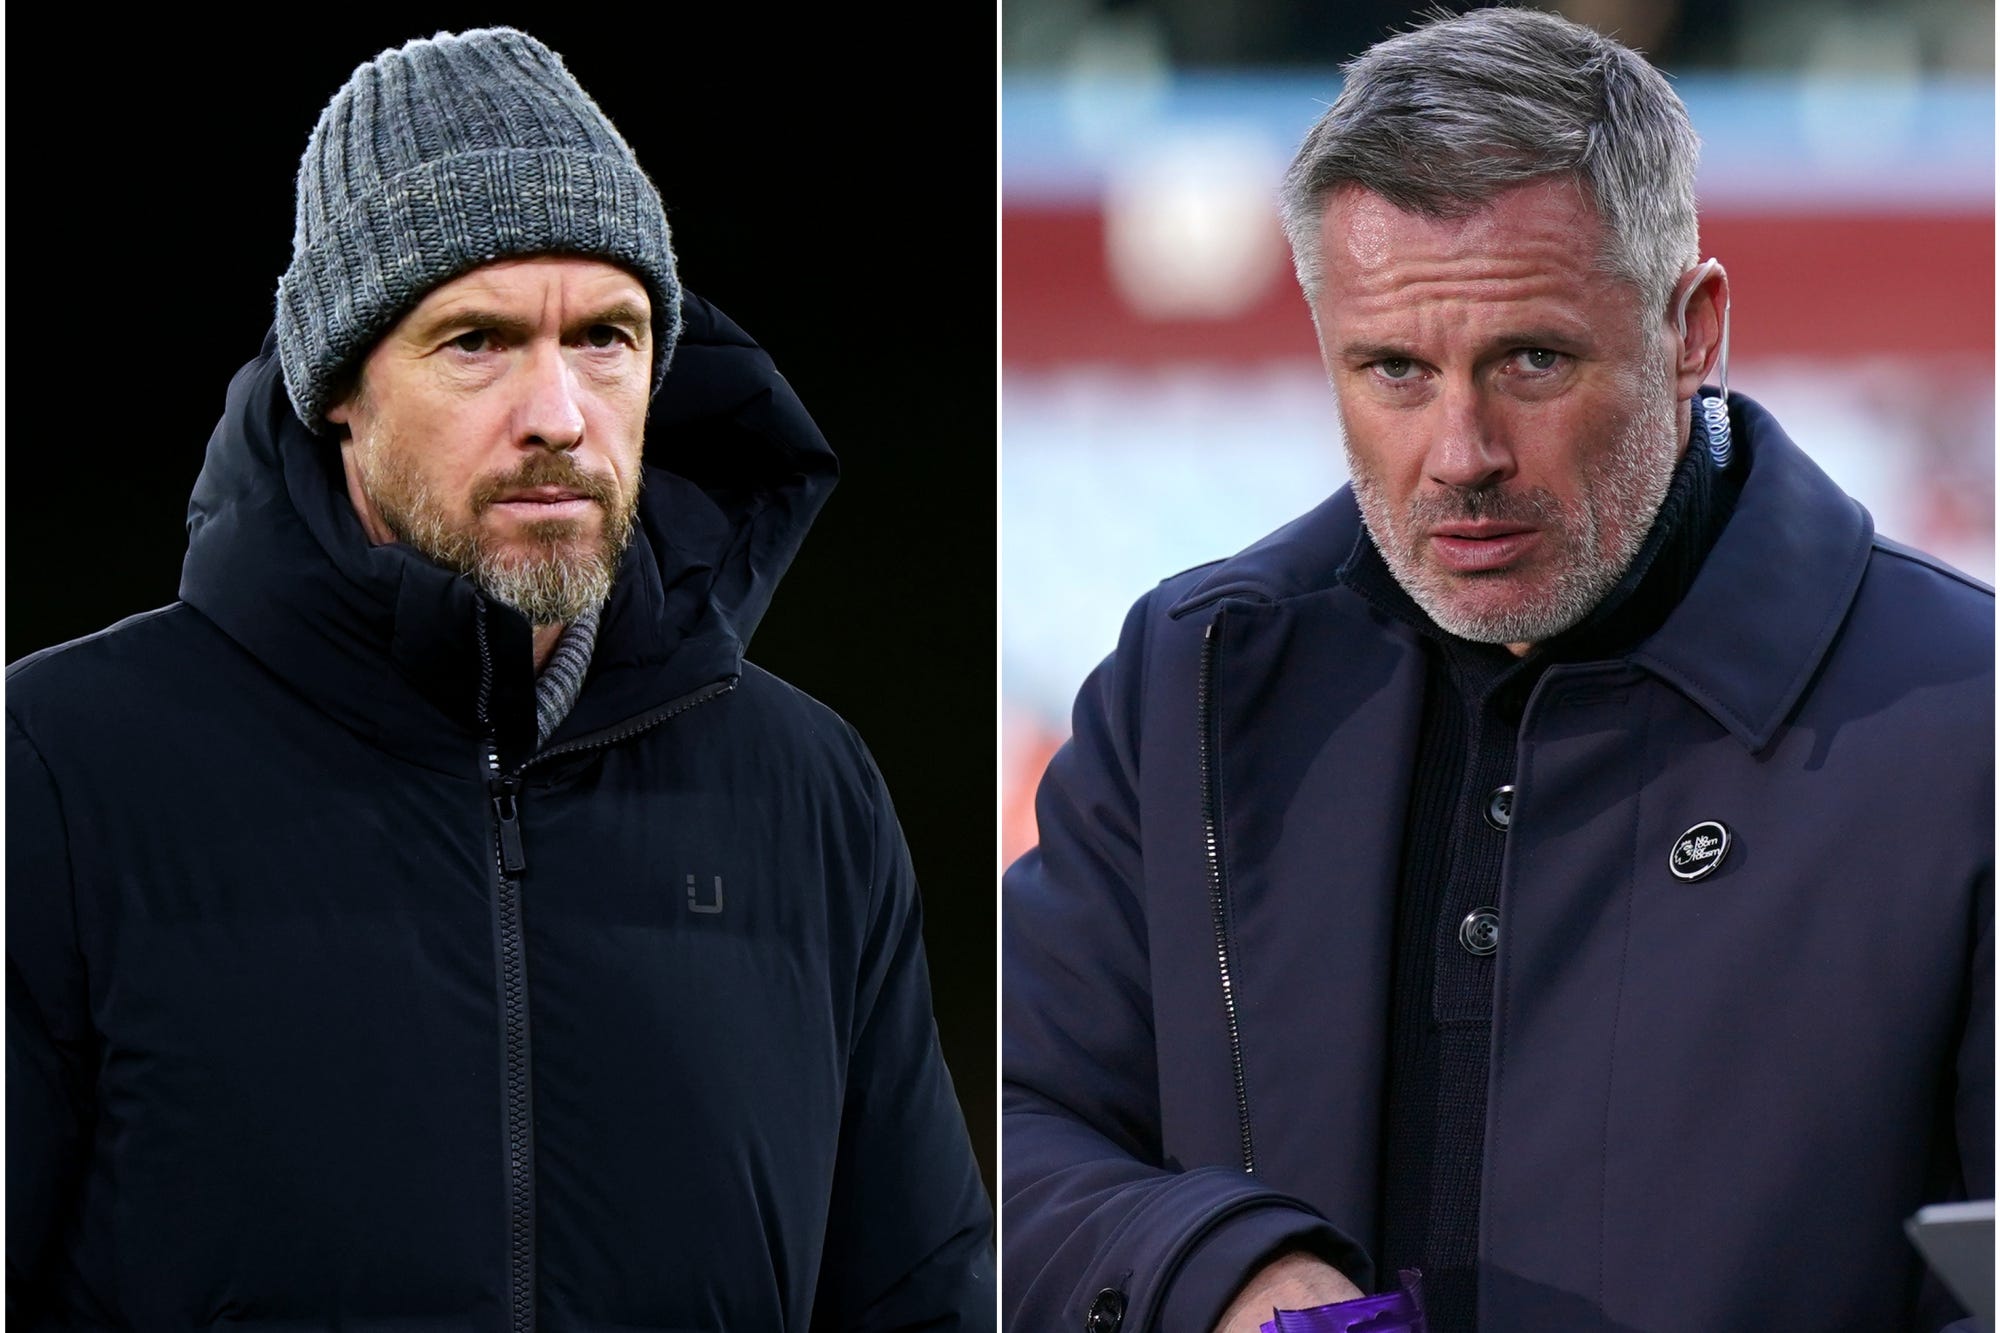 Manchester United manager Erik ten Hag and Sky Sports’ Jamie Carragher